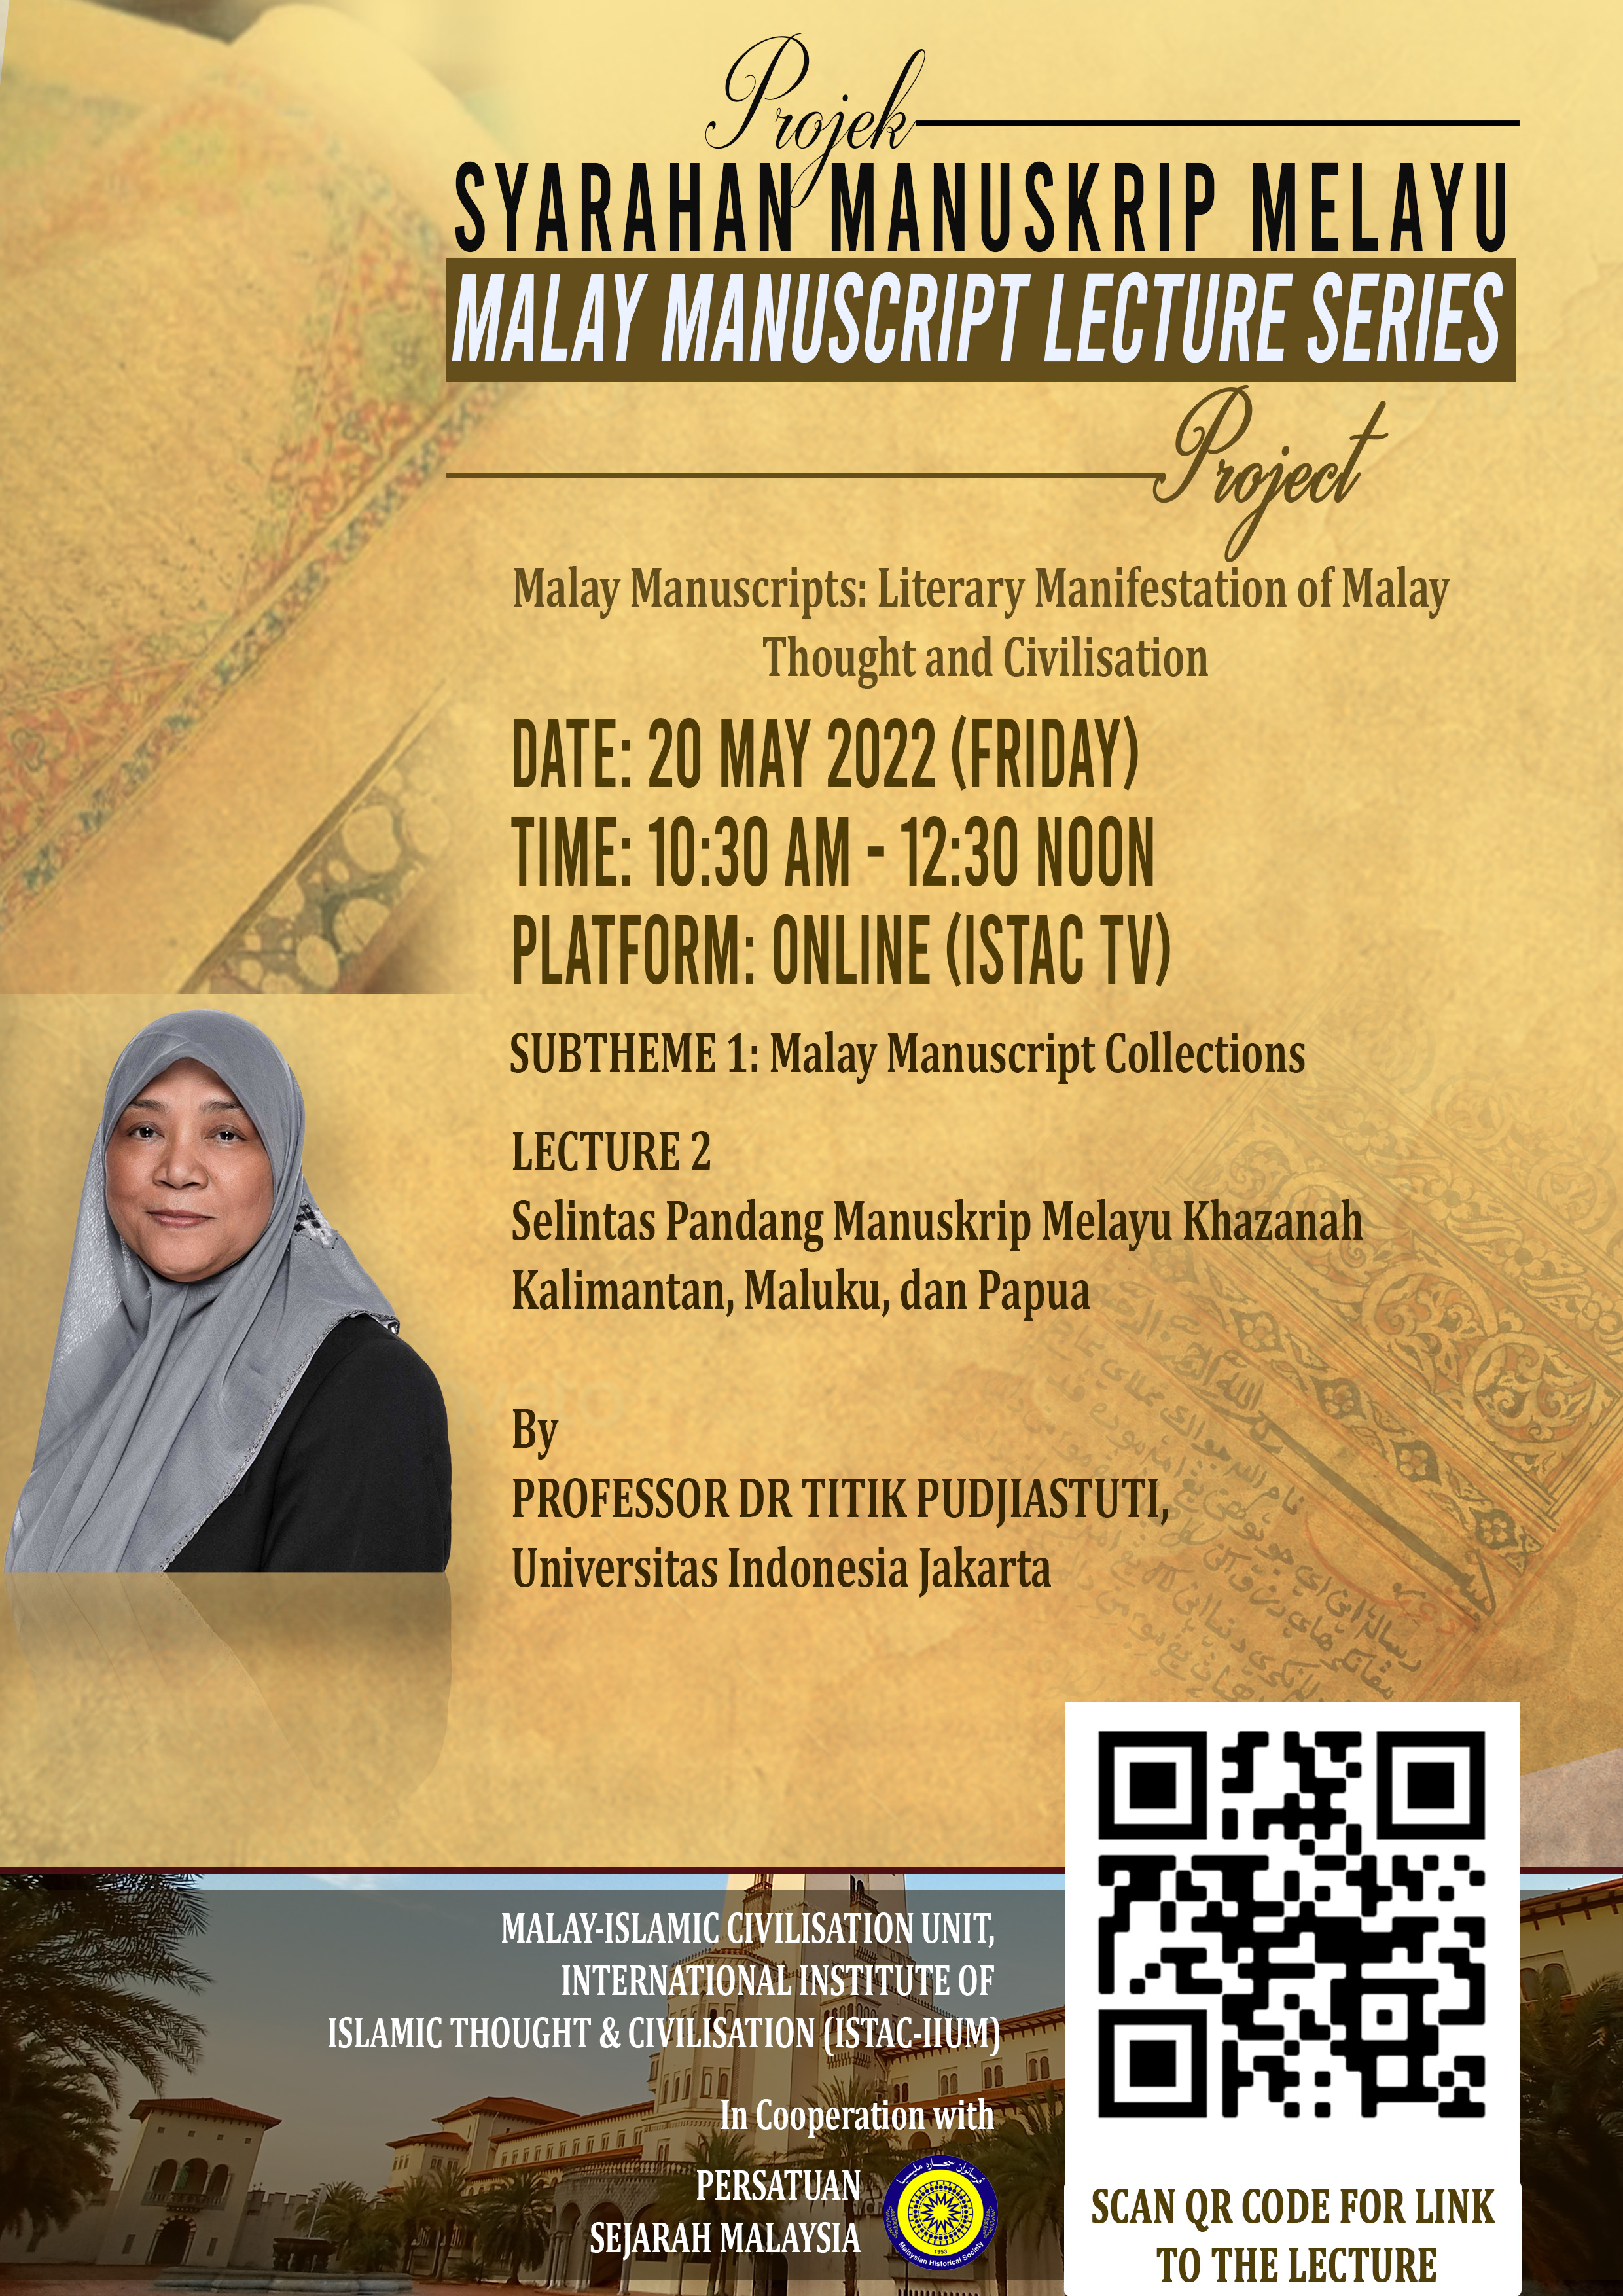 MALAY MANUSCRIPT LECTURE SERIES PROJECT